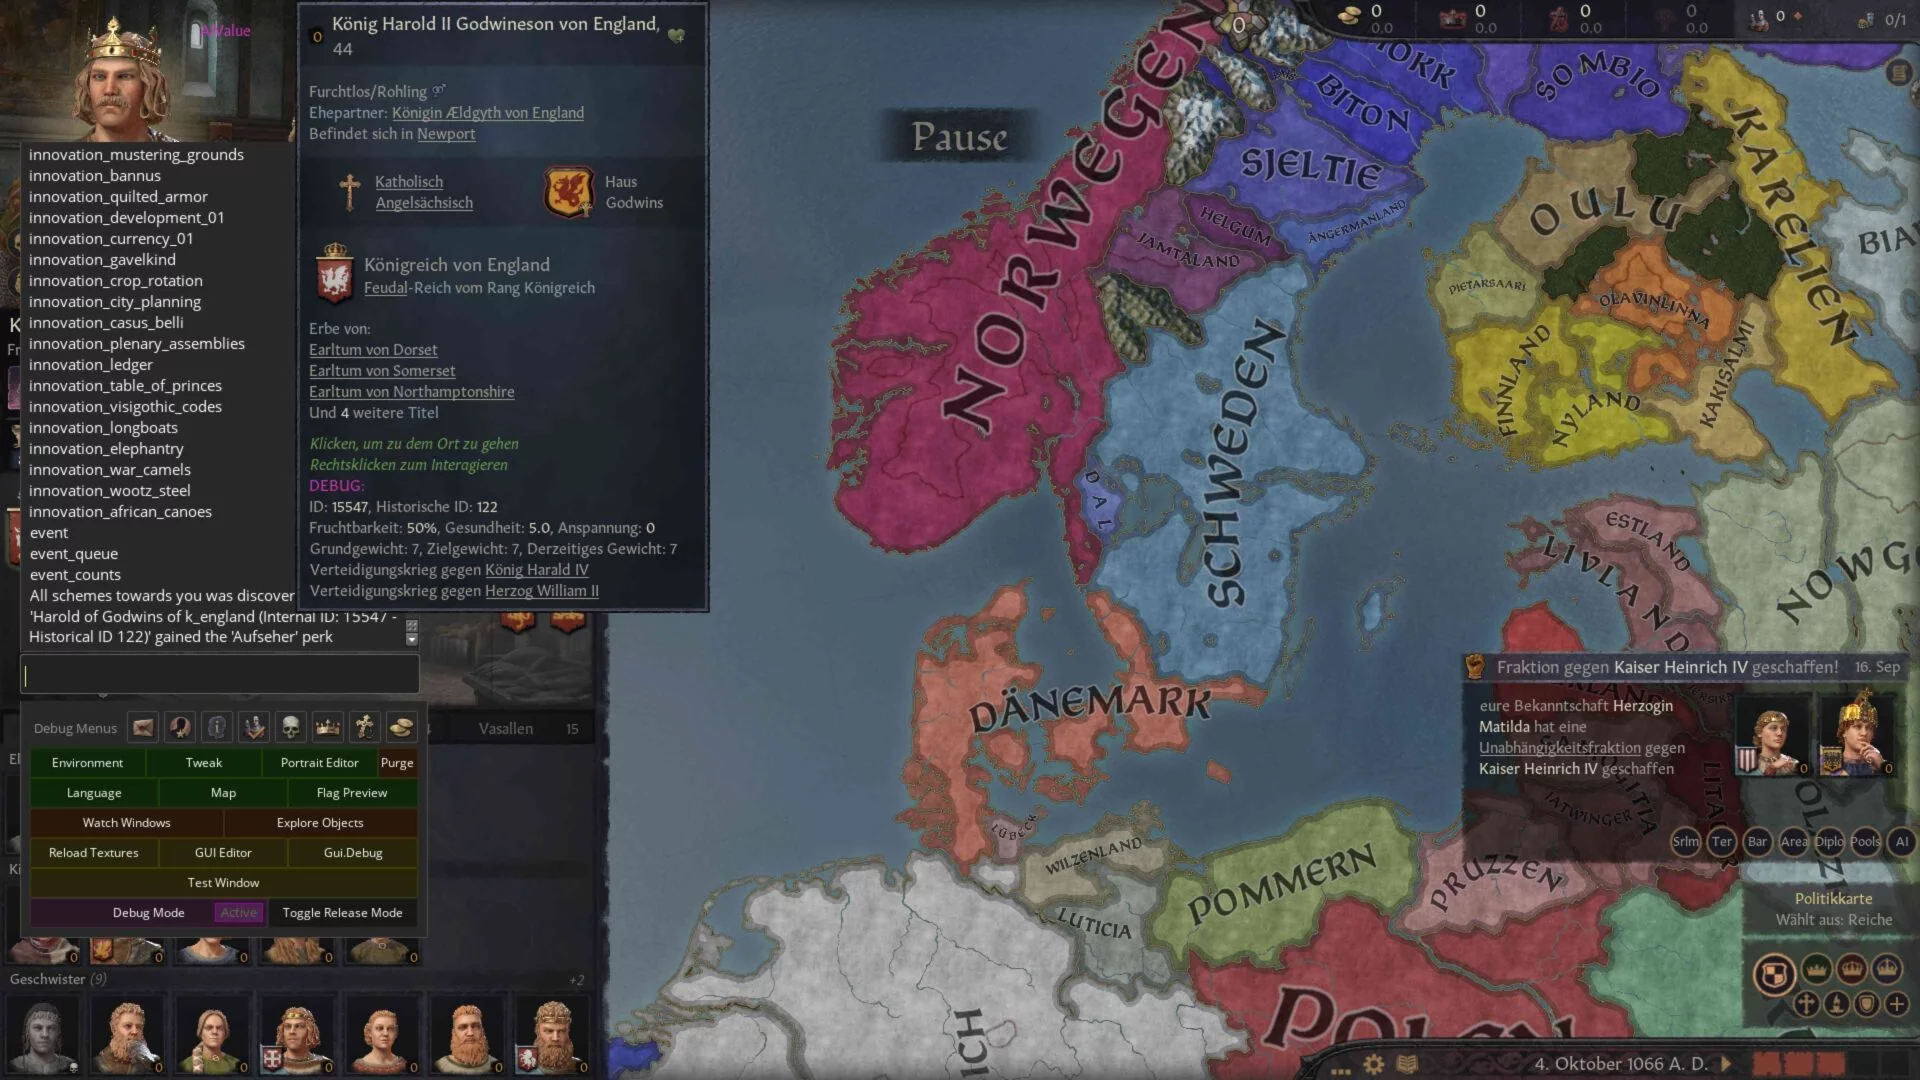 Crusader Kings 3 overview map with England and activated cheat console, the innovations list shows